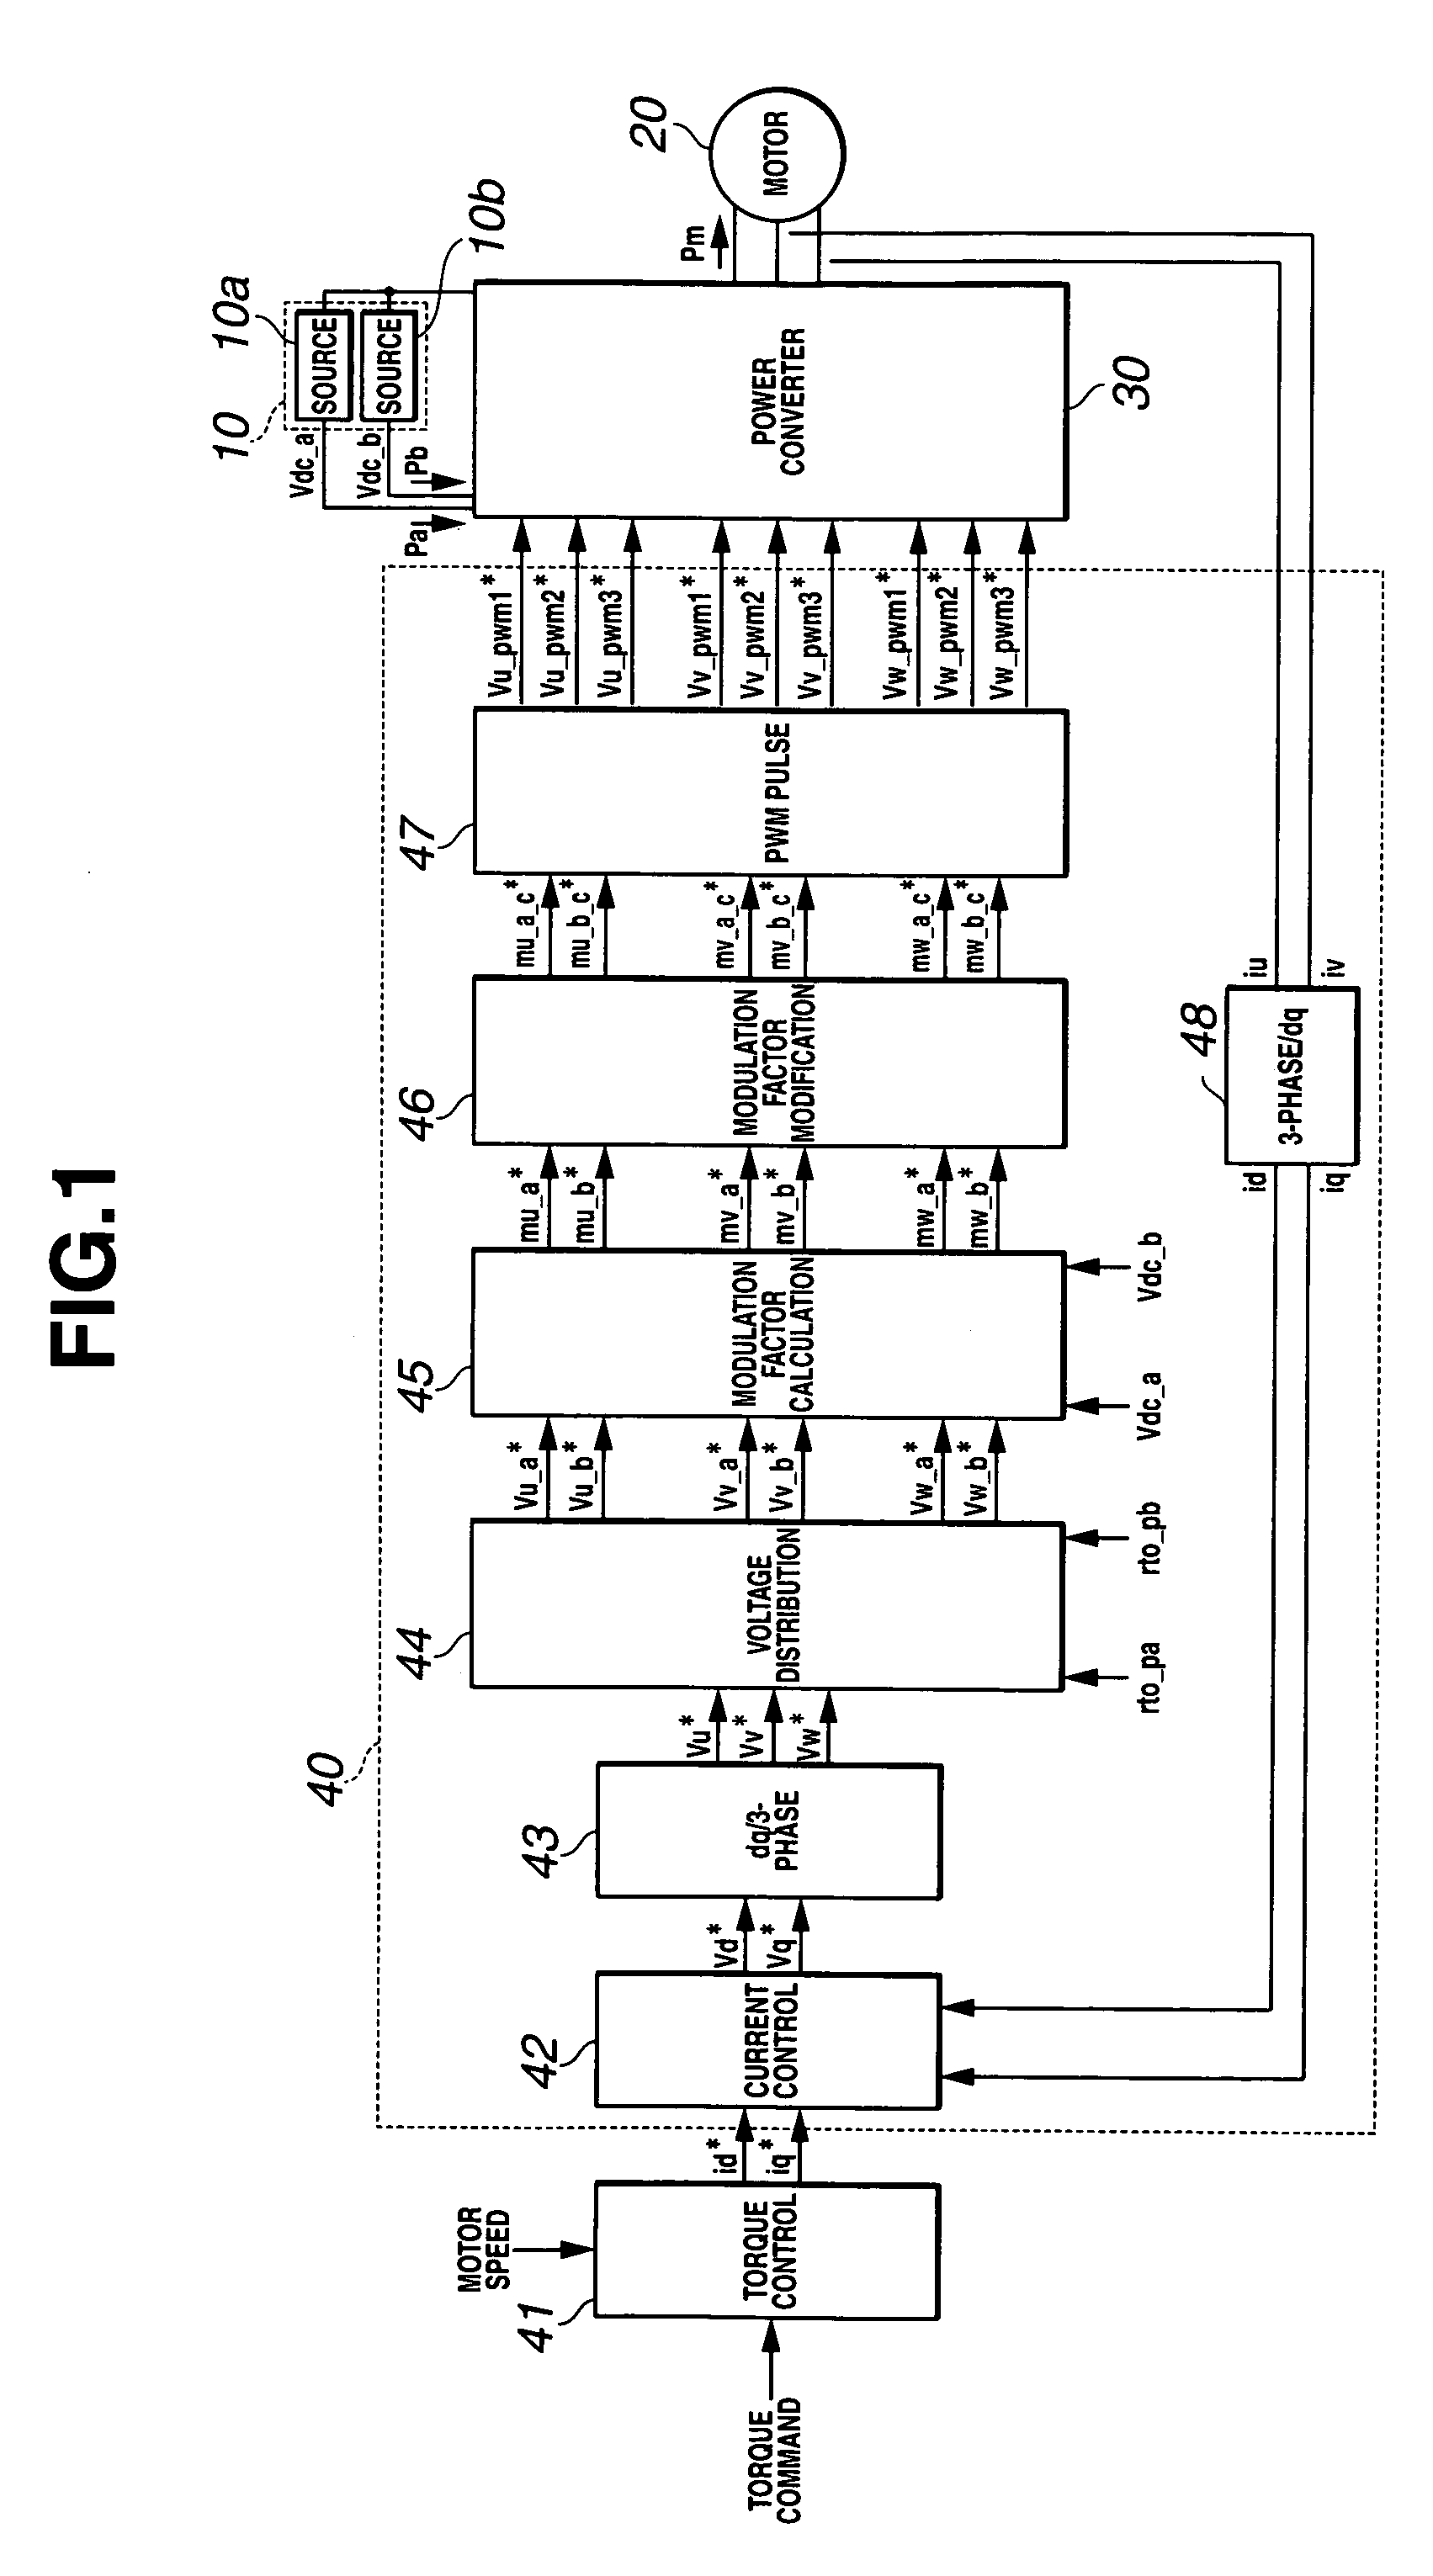 Motor drive system and process